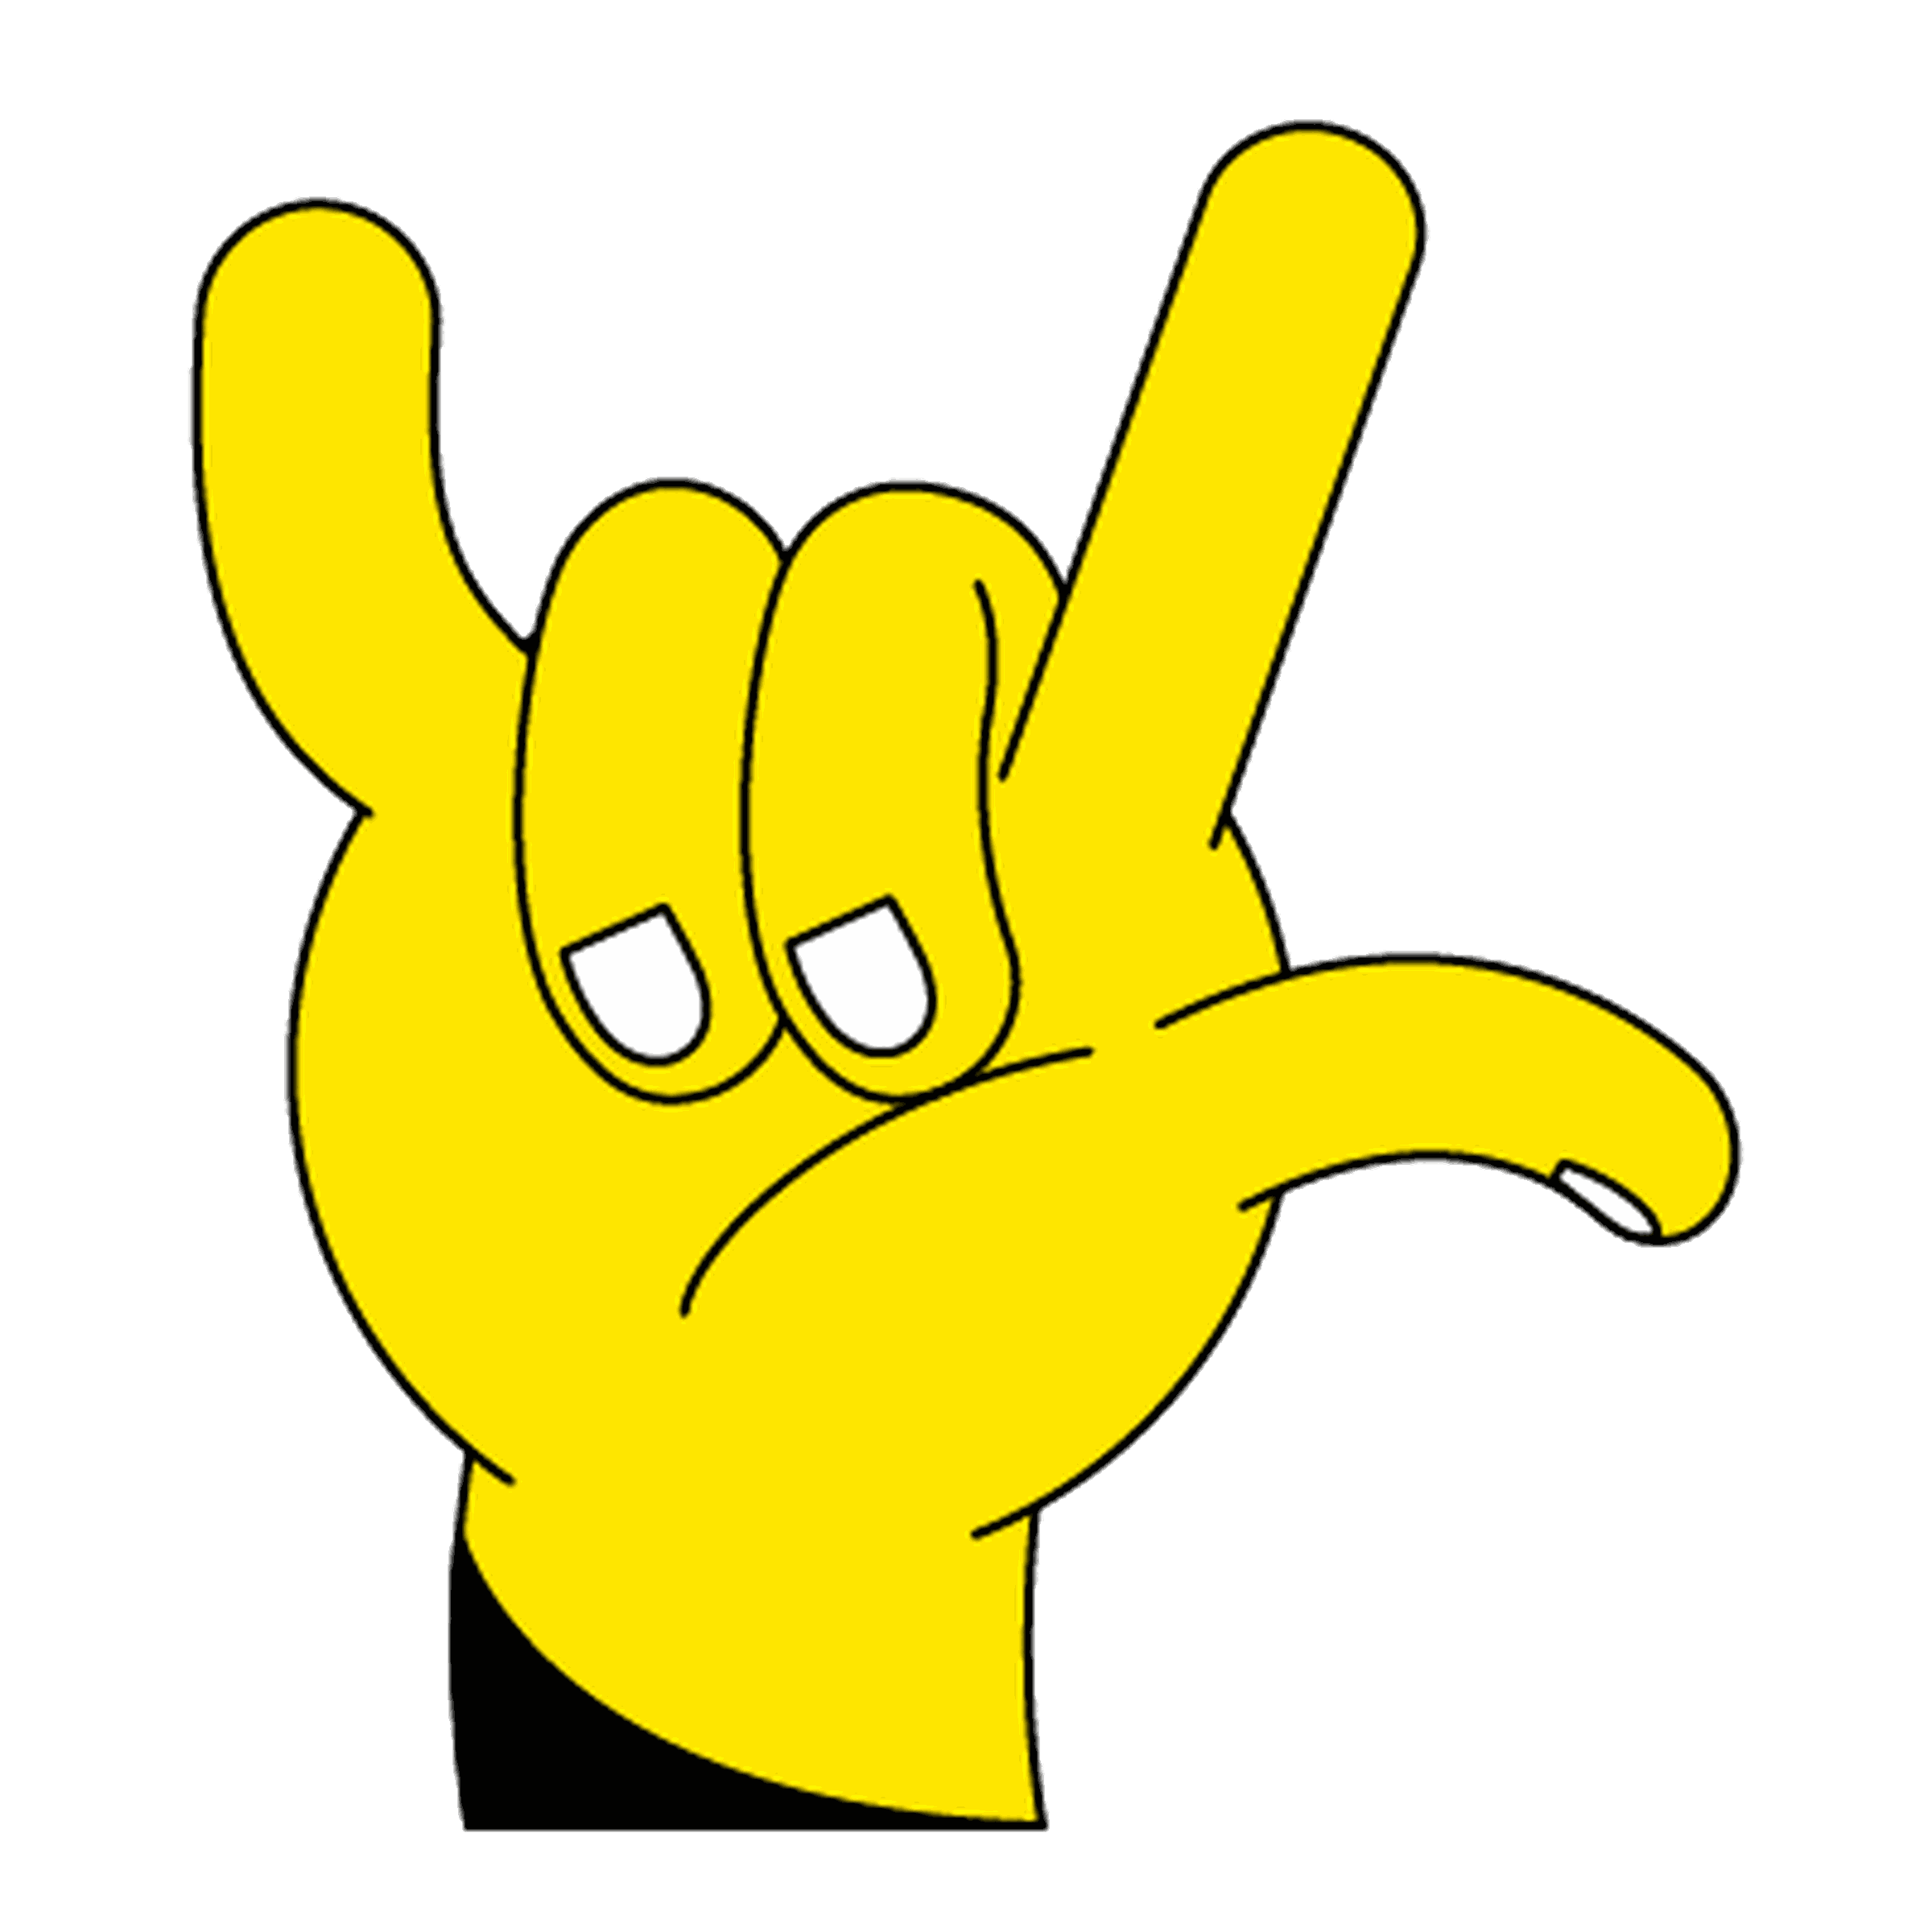 A Snap sticker with the ASL sign for “I love you.”